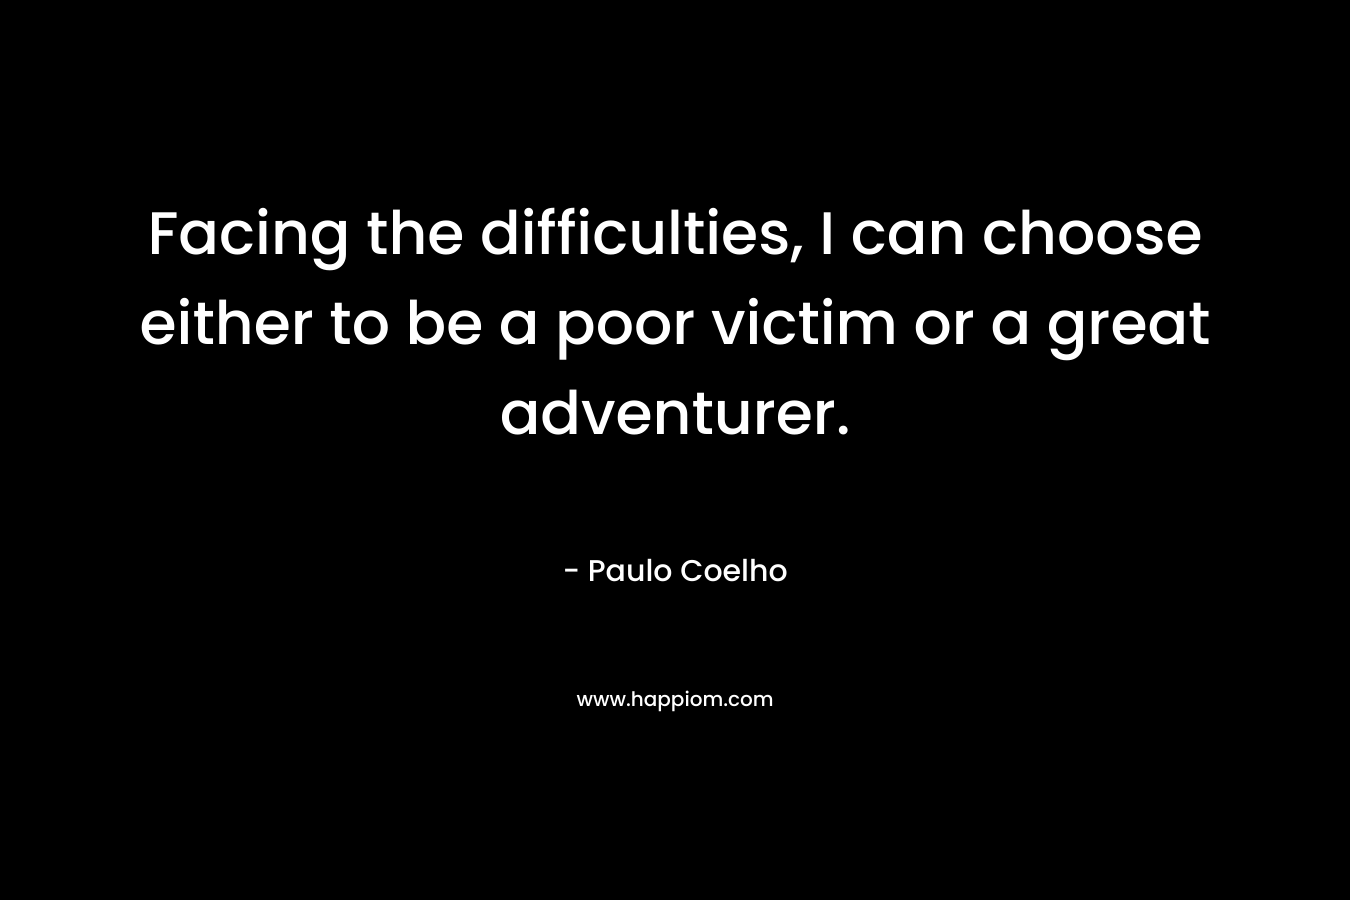 Facing the difficulties, I can choose either to be a poor victim or a great adventurer.